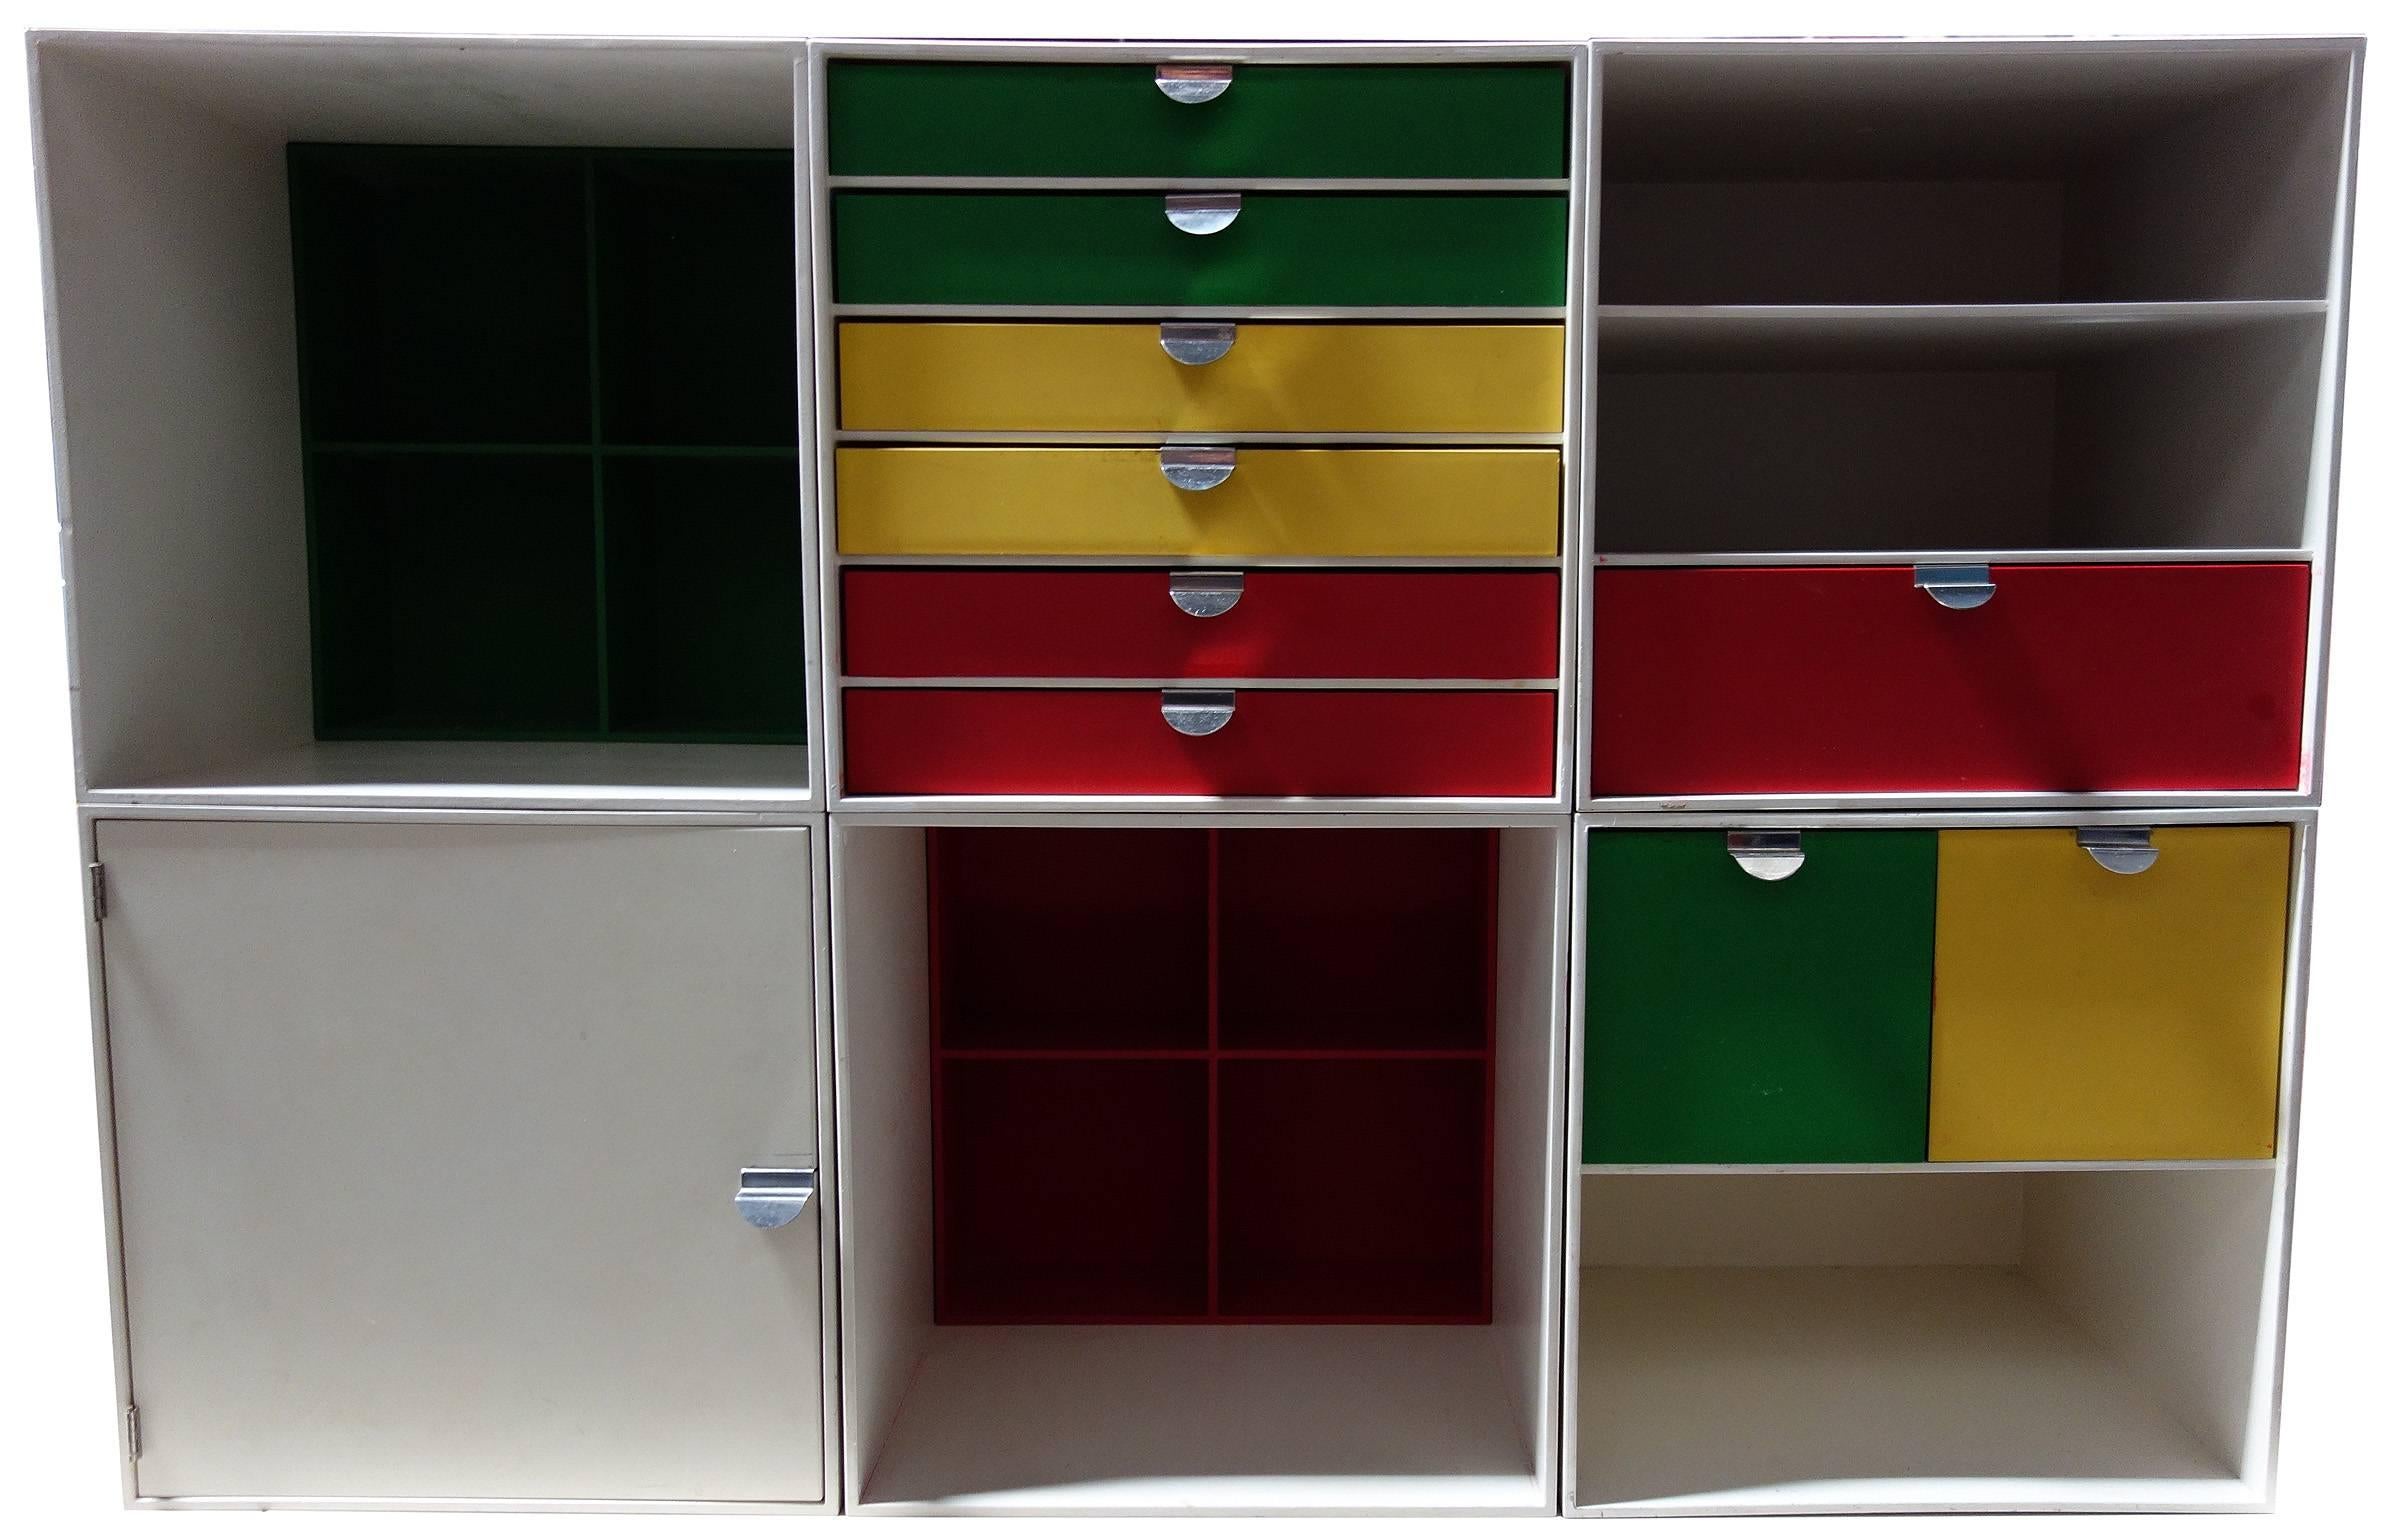 Practical and aesthetically pleasing. Palaset storage cubes can be reconfigured to your needs. They can be placed on a bench to be used as a credenza, wall units, end tables, bookcases etc. Made of a very stable and heavy wood or resin like plastic.